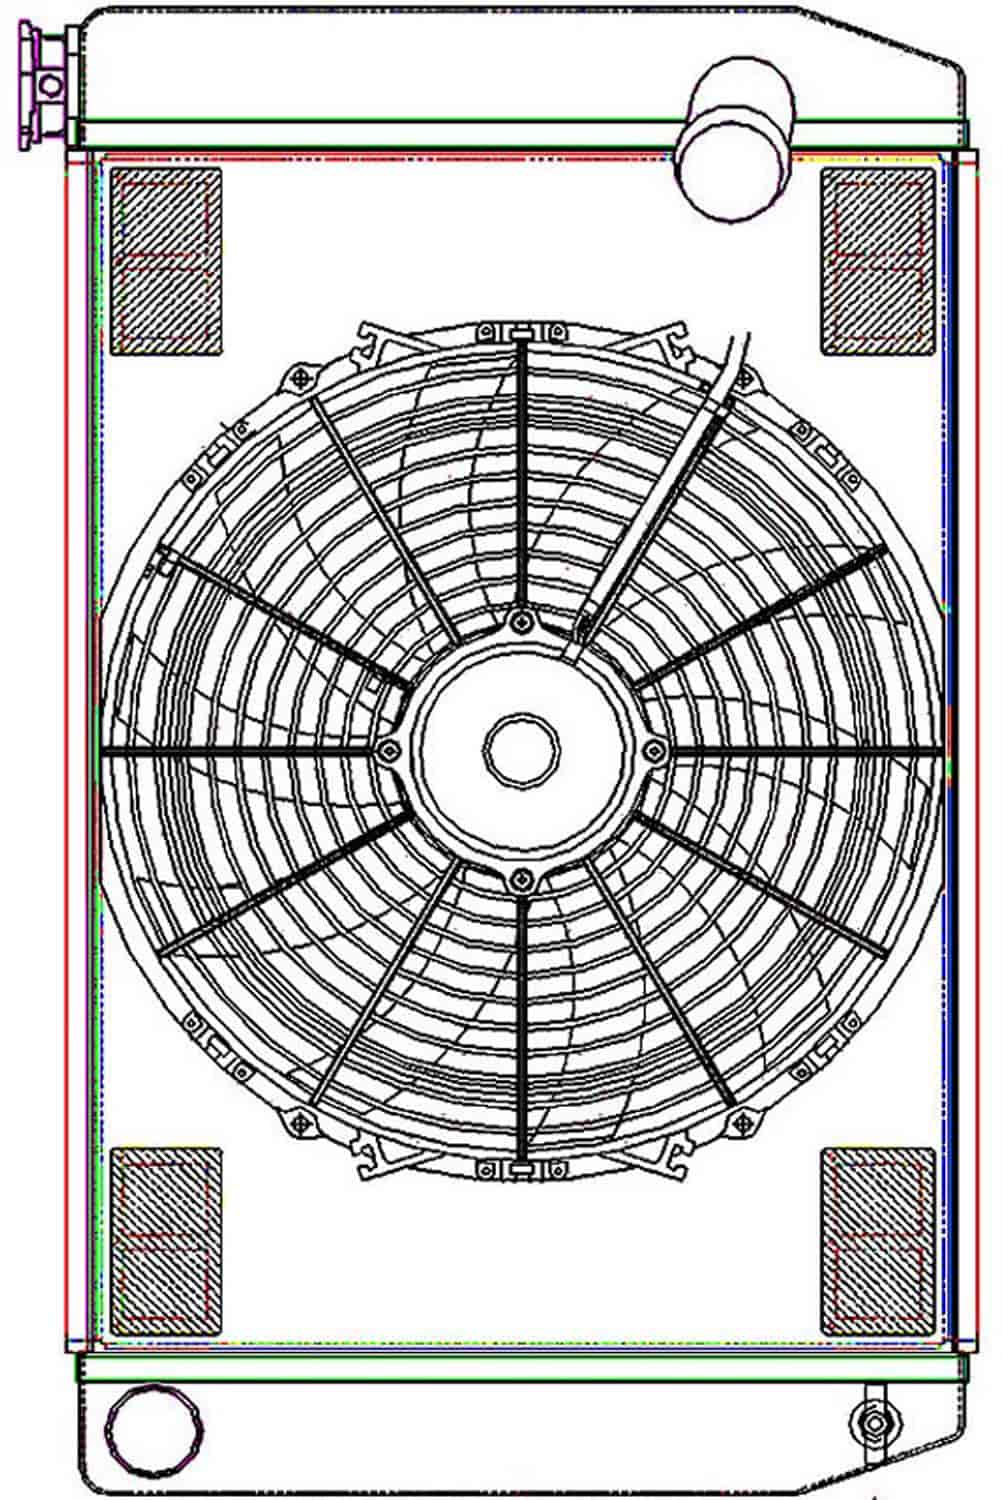 ClassicCool ComboUnit Universal Fit Radiator and Fan Single Pass Crossflow Design 26" x 15.50" with No Options